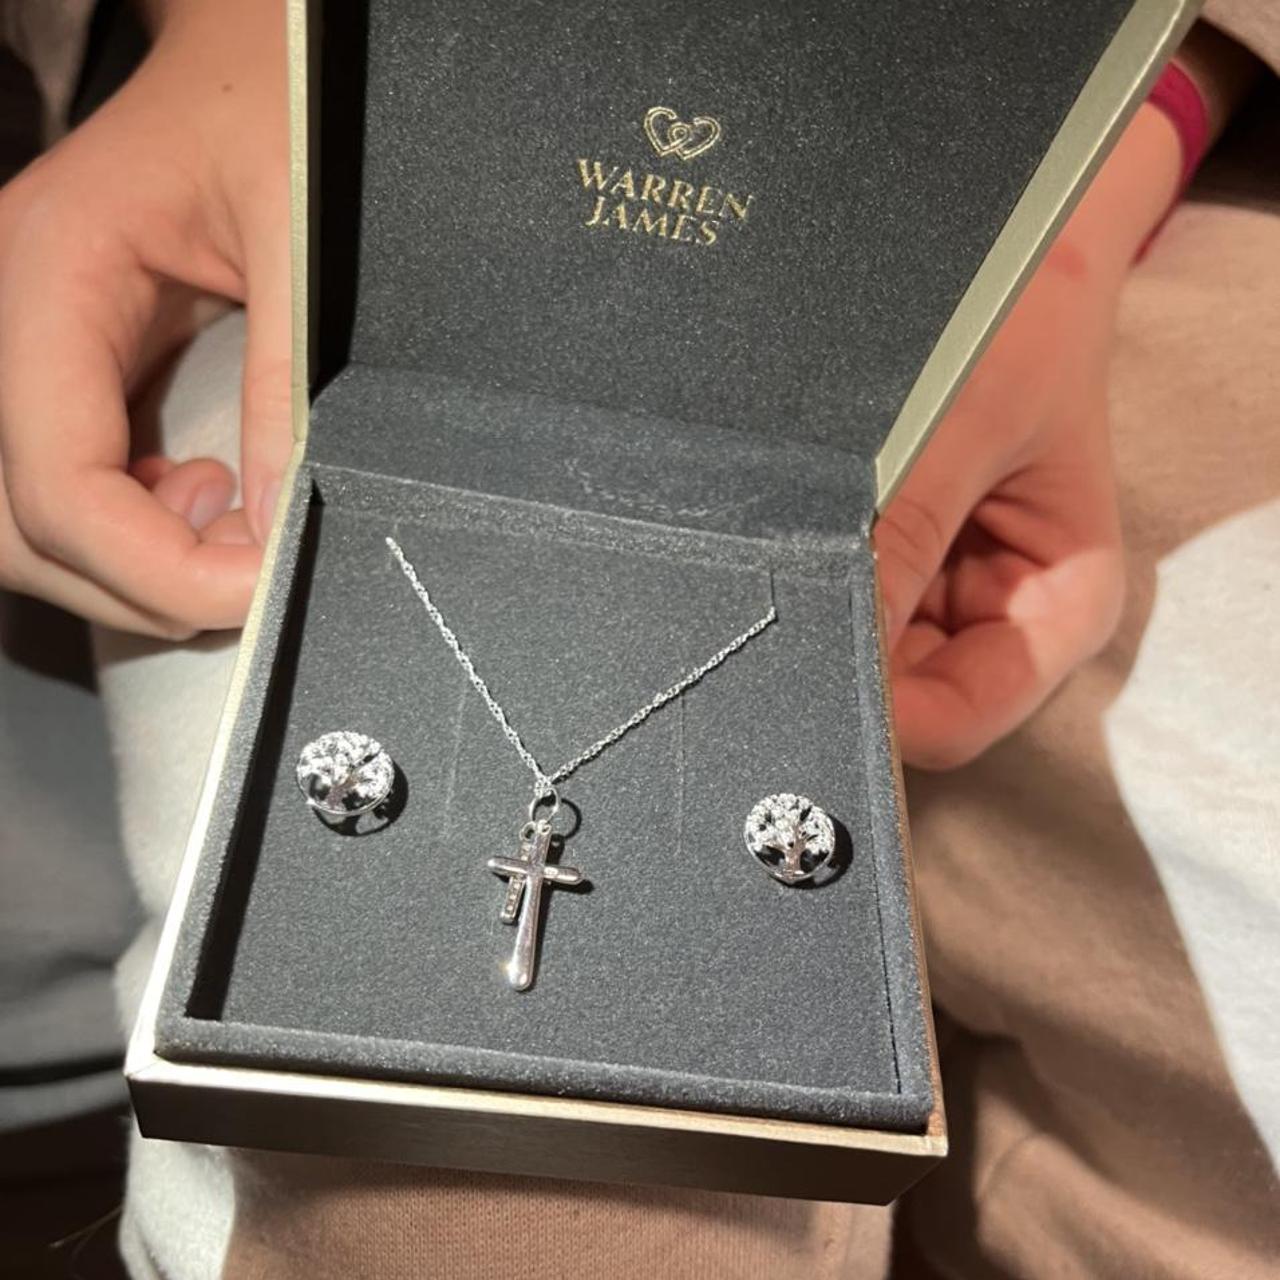 Woman's necklace and earring set | in Sutton-on-Hull, East Yorkshire |  Gumtree